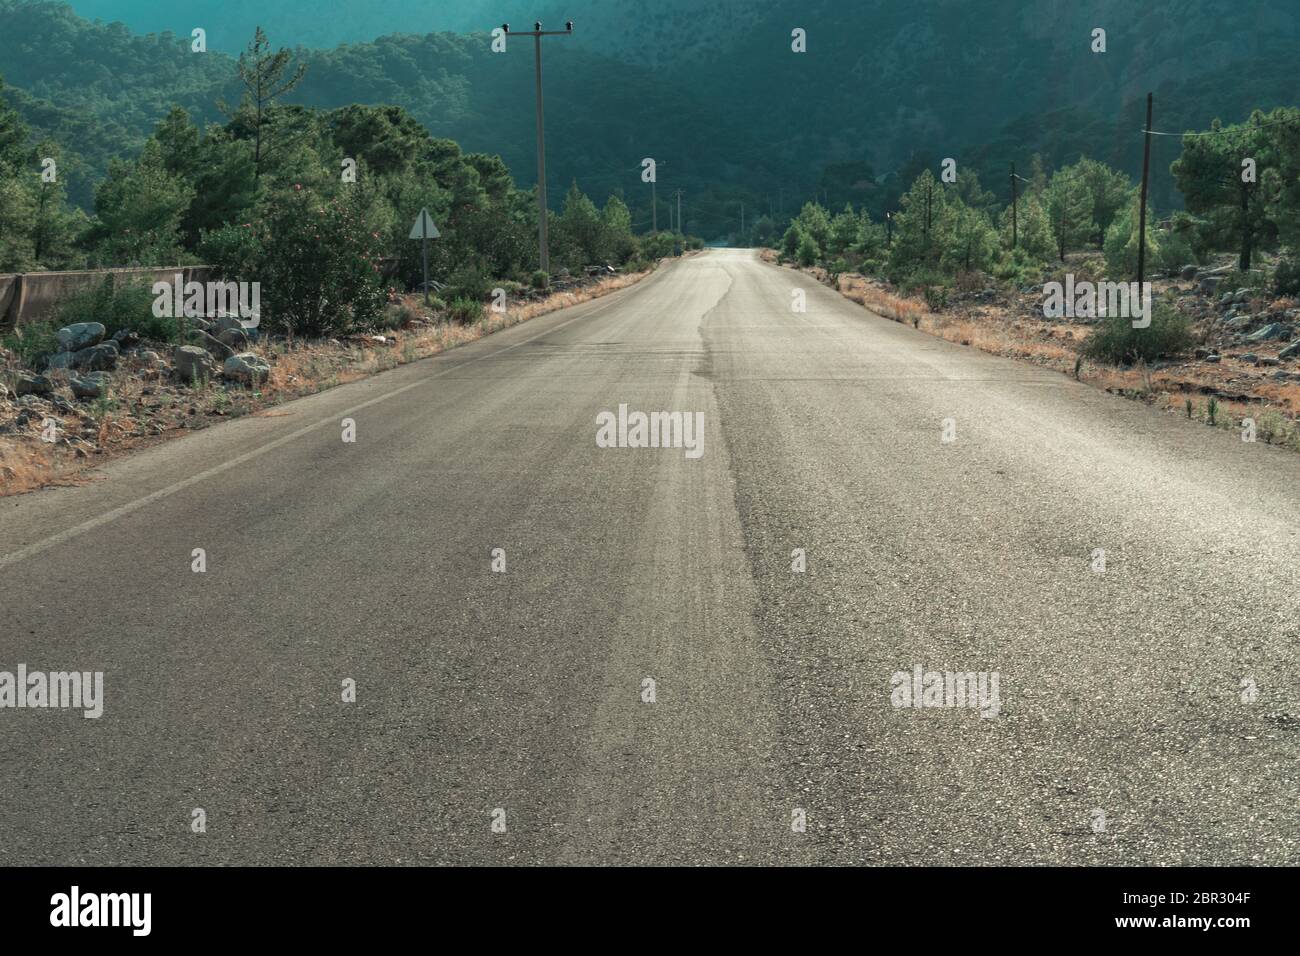 Empty rural countryside tarmac road outside Antalya With green trees along the way and maountains in the background. Stock Photo